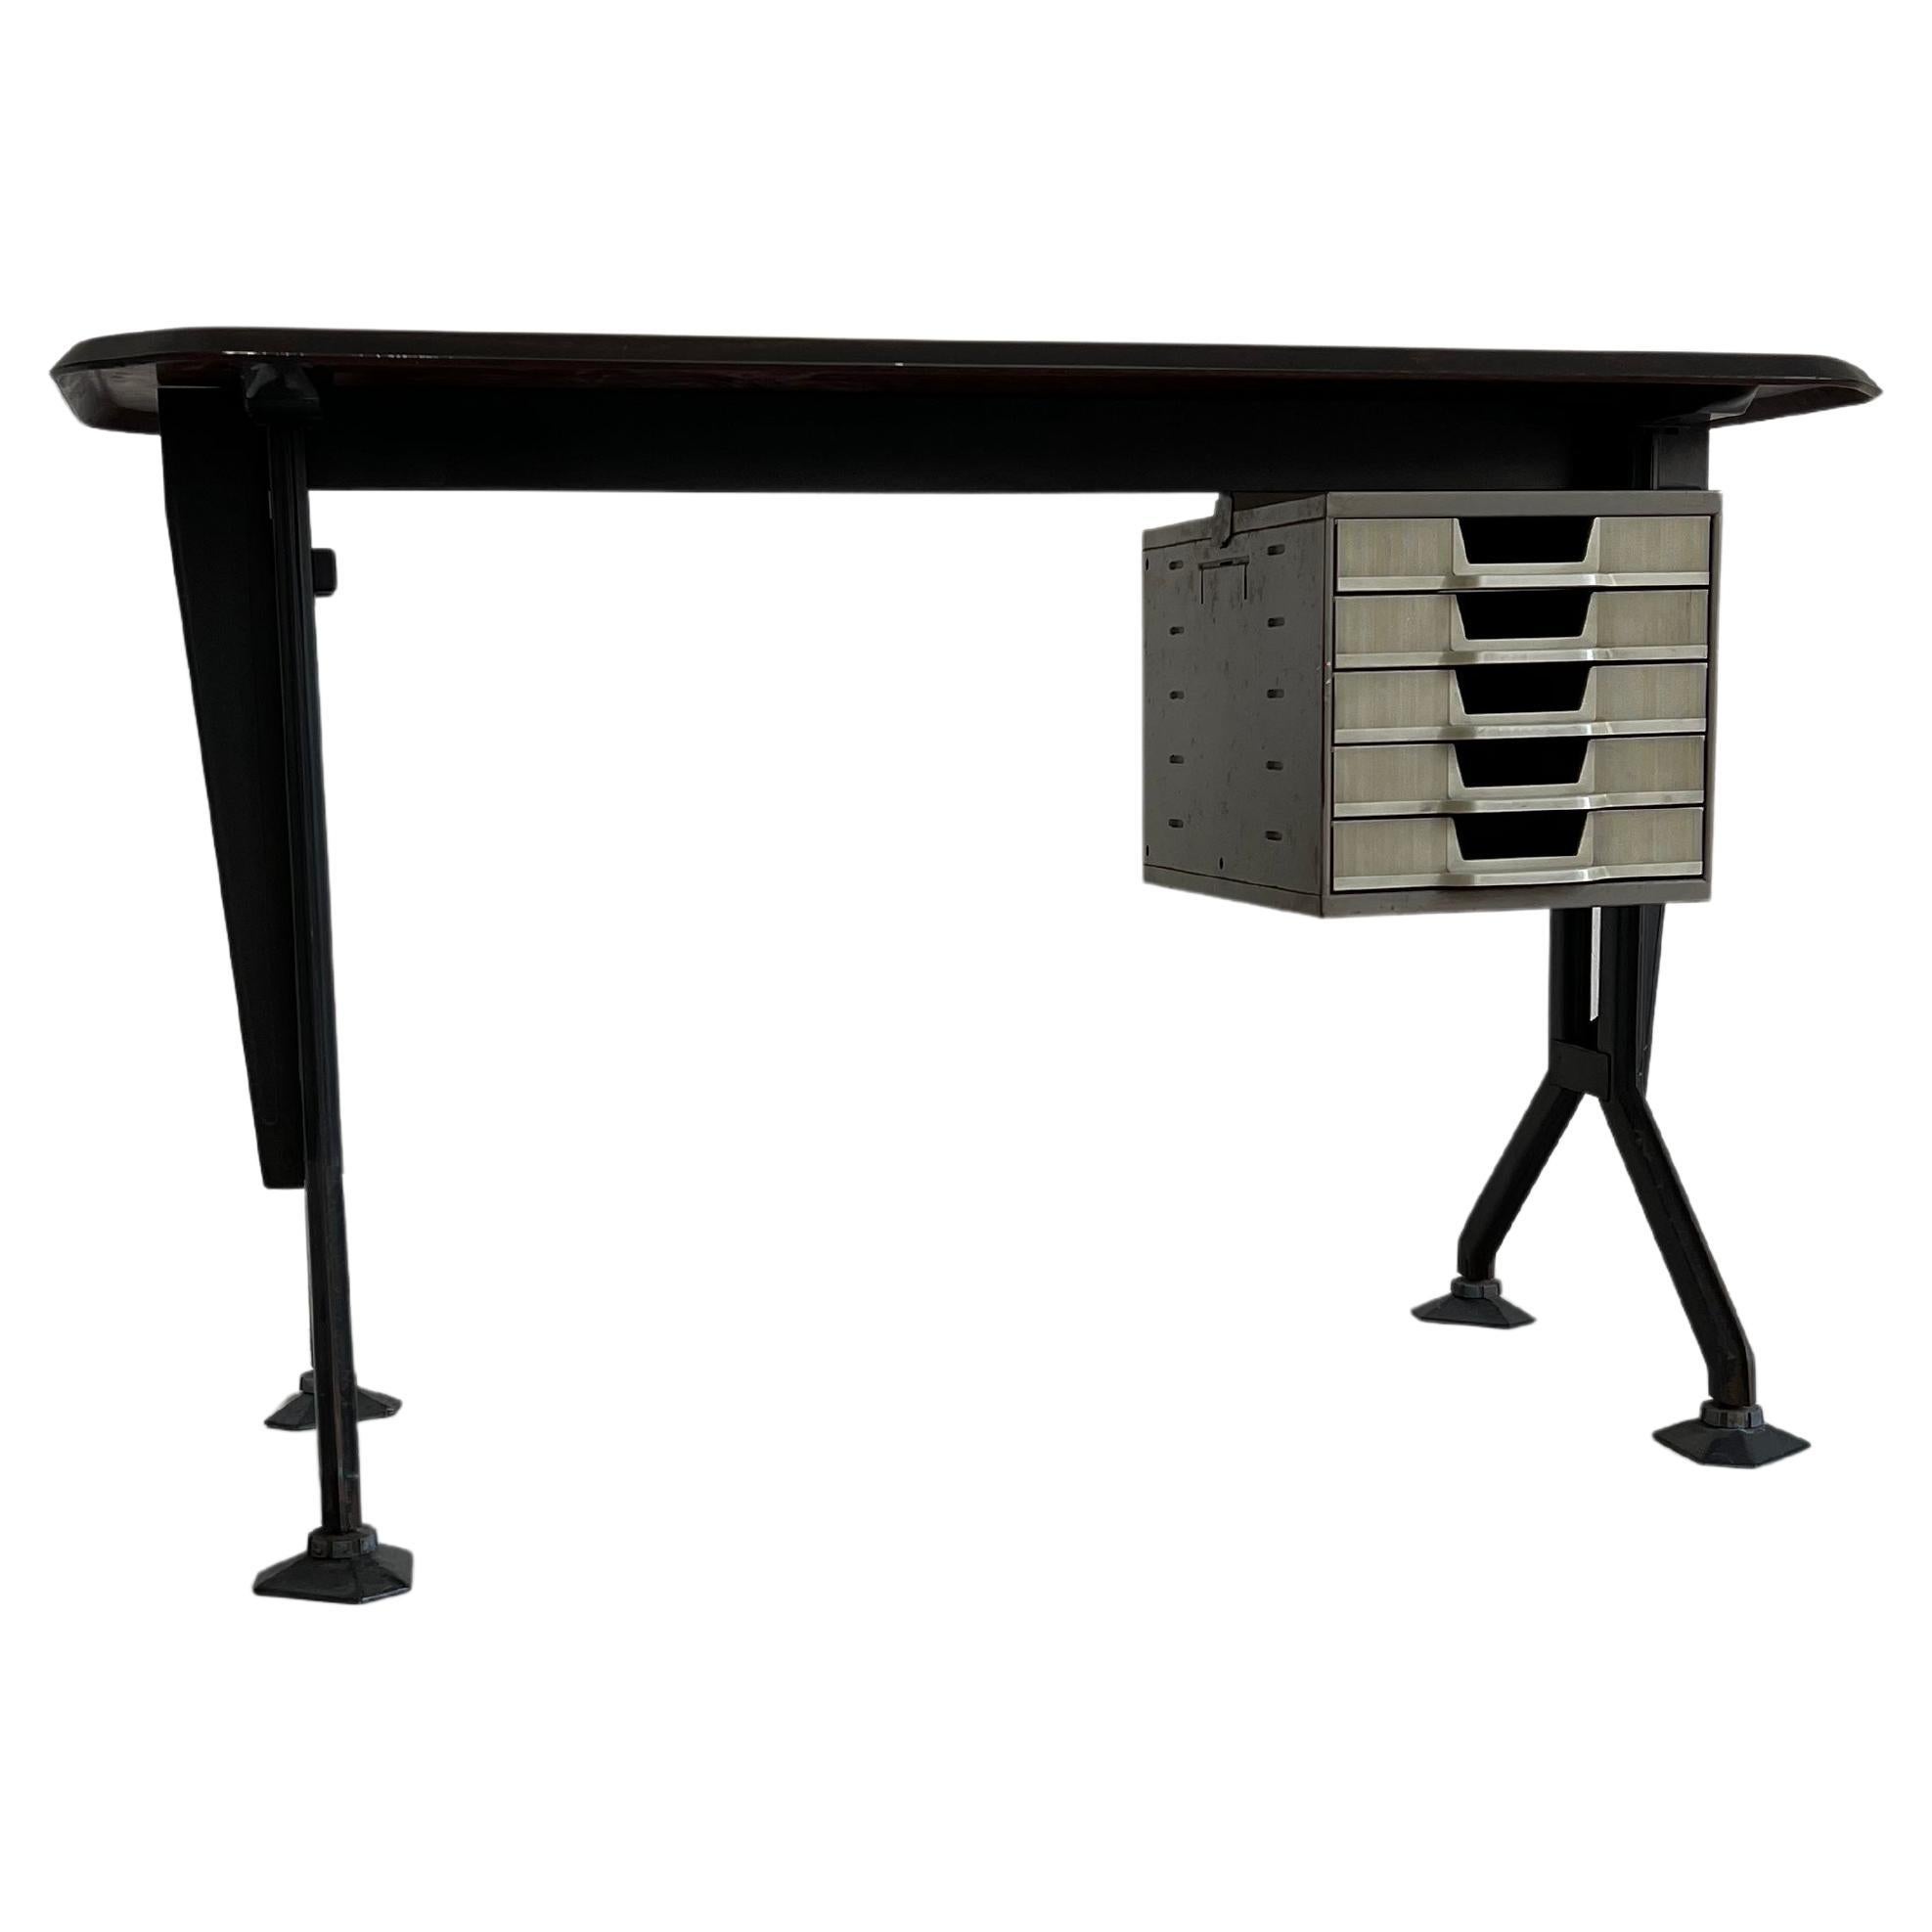 Vintage Italian "Arco" Desk by BBPR for Olivetti Synthesis